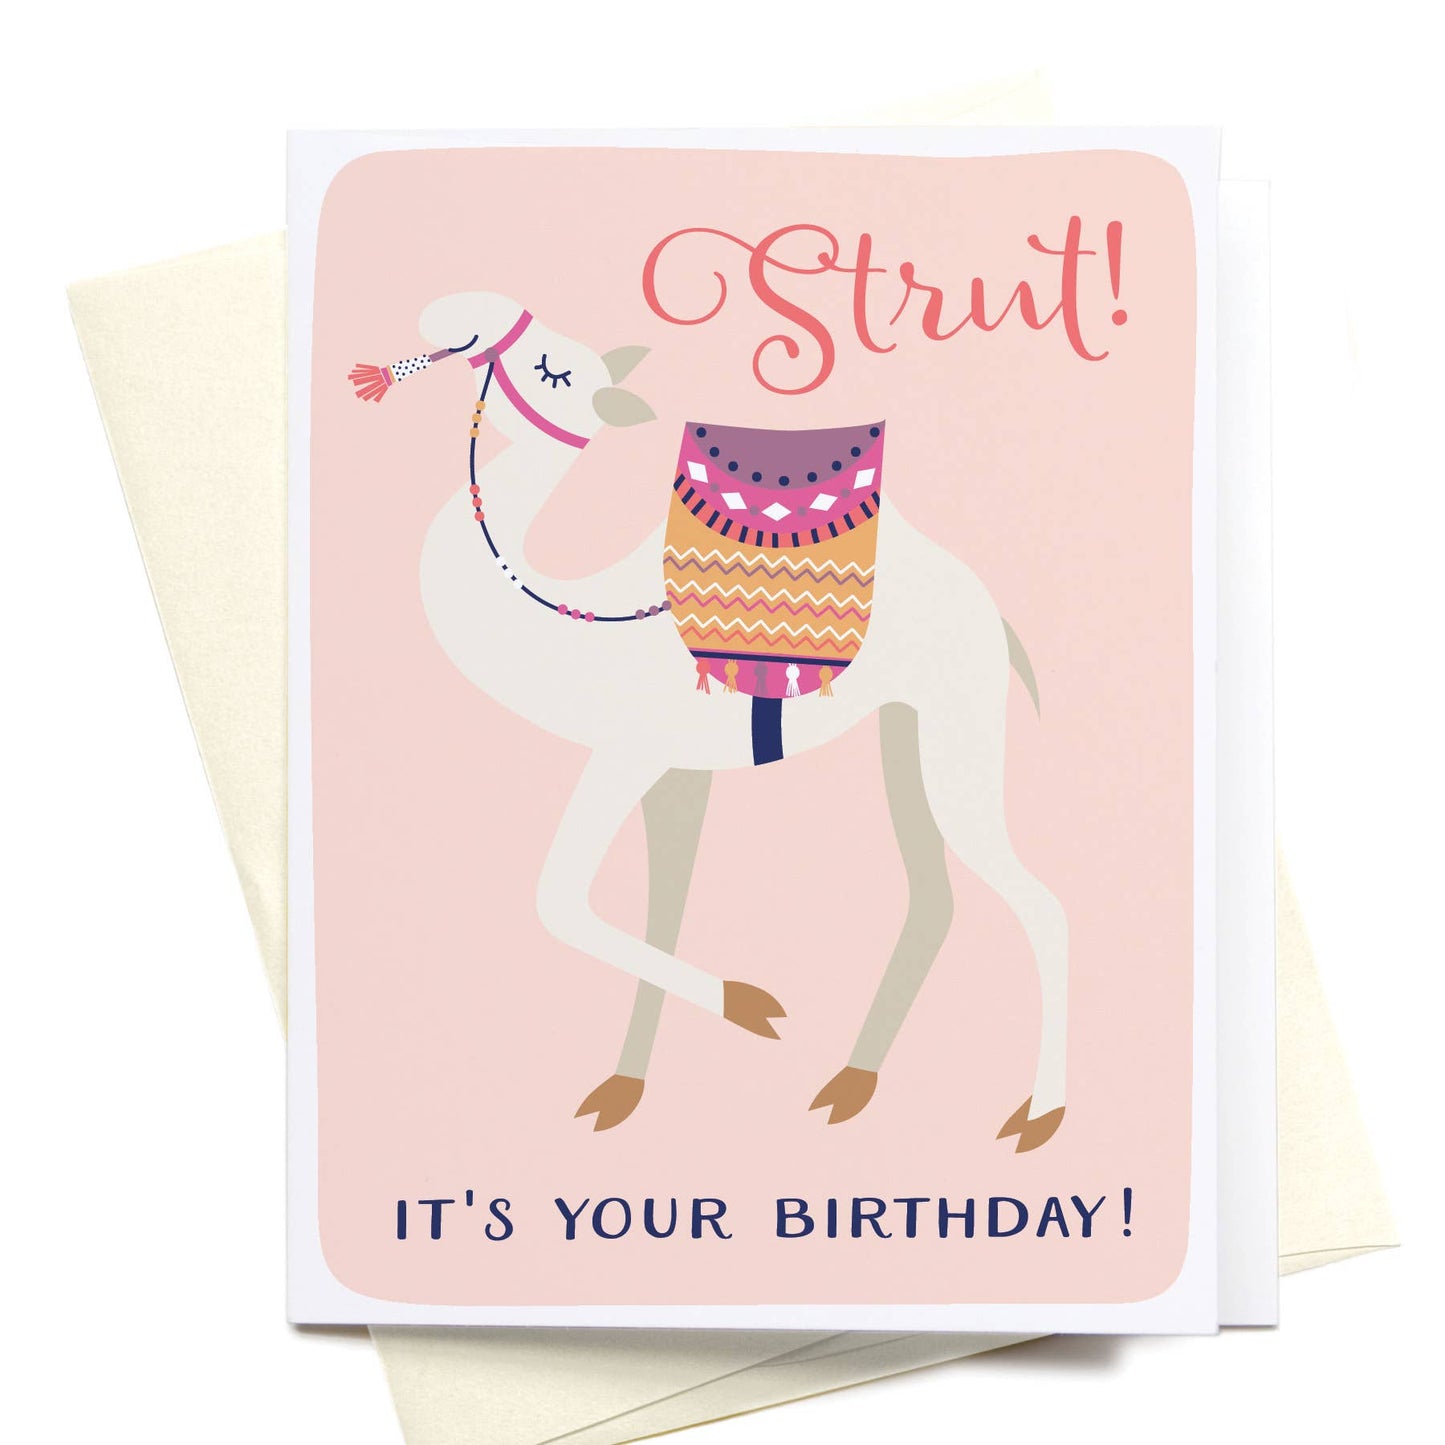 "Strut! It's Your Birthday!" Camel Greeting Card